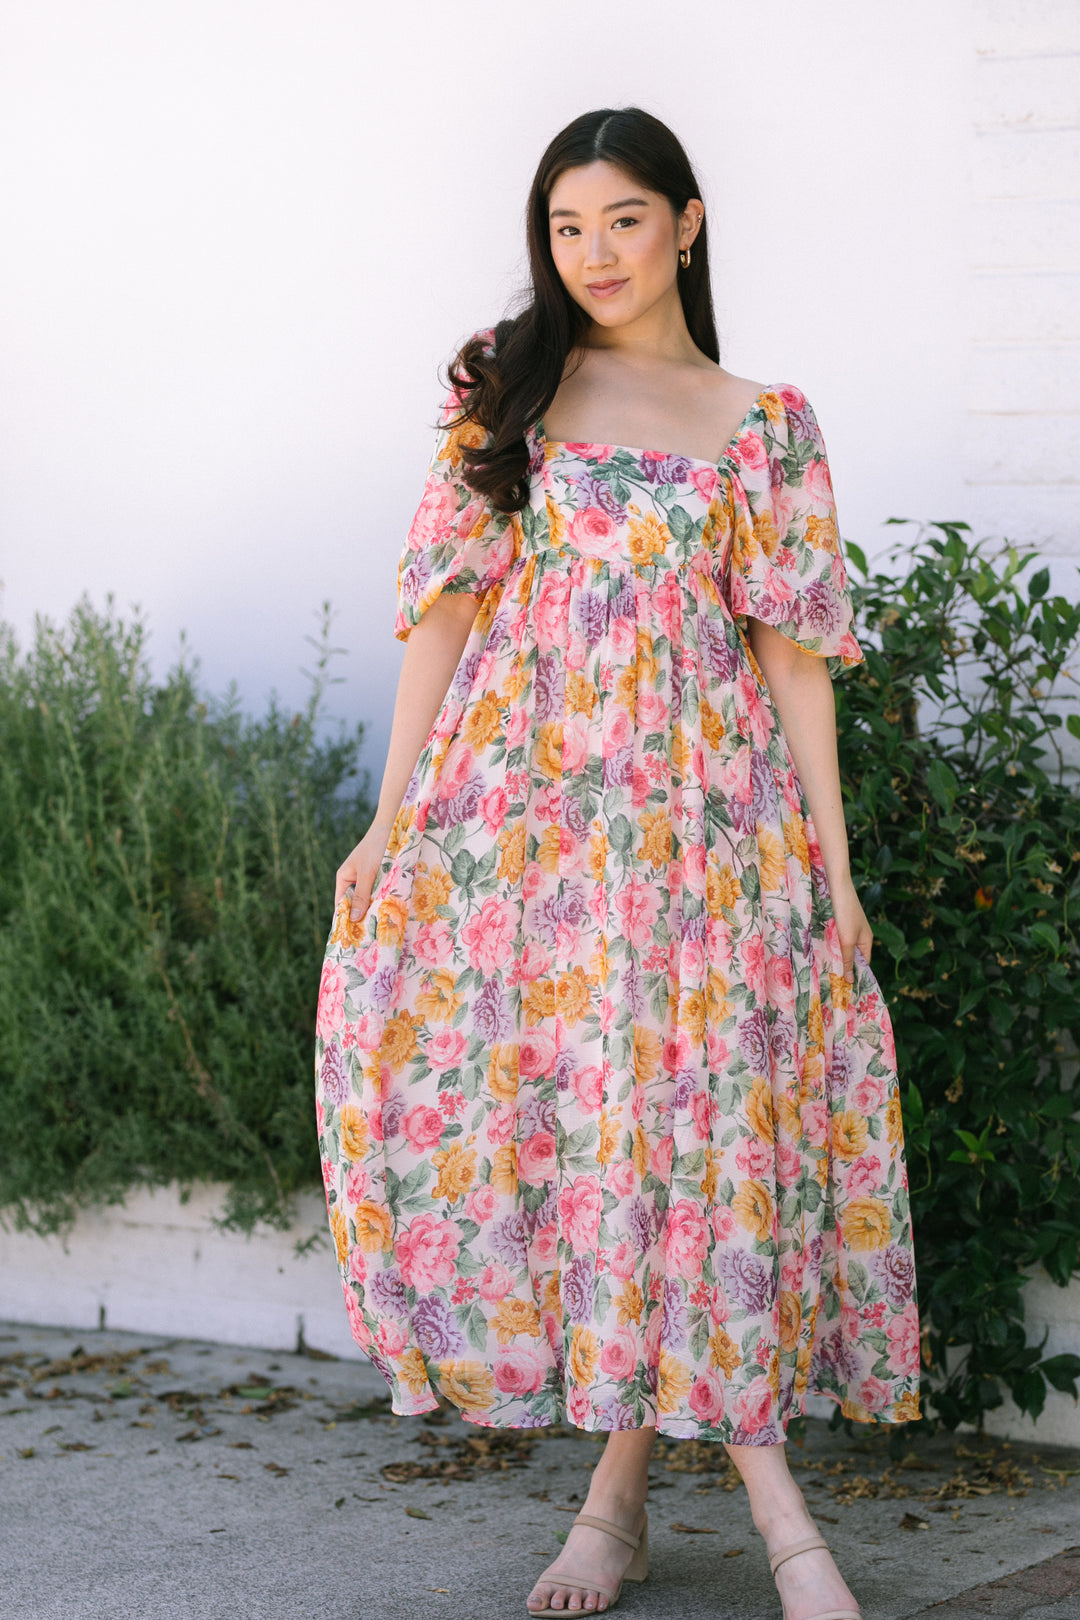 Four Dresses To Wear To A Garden Party